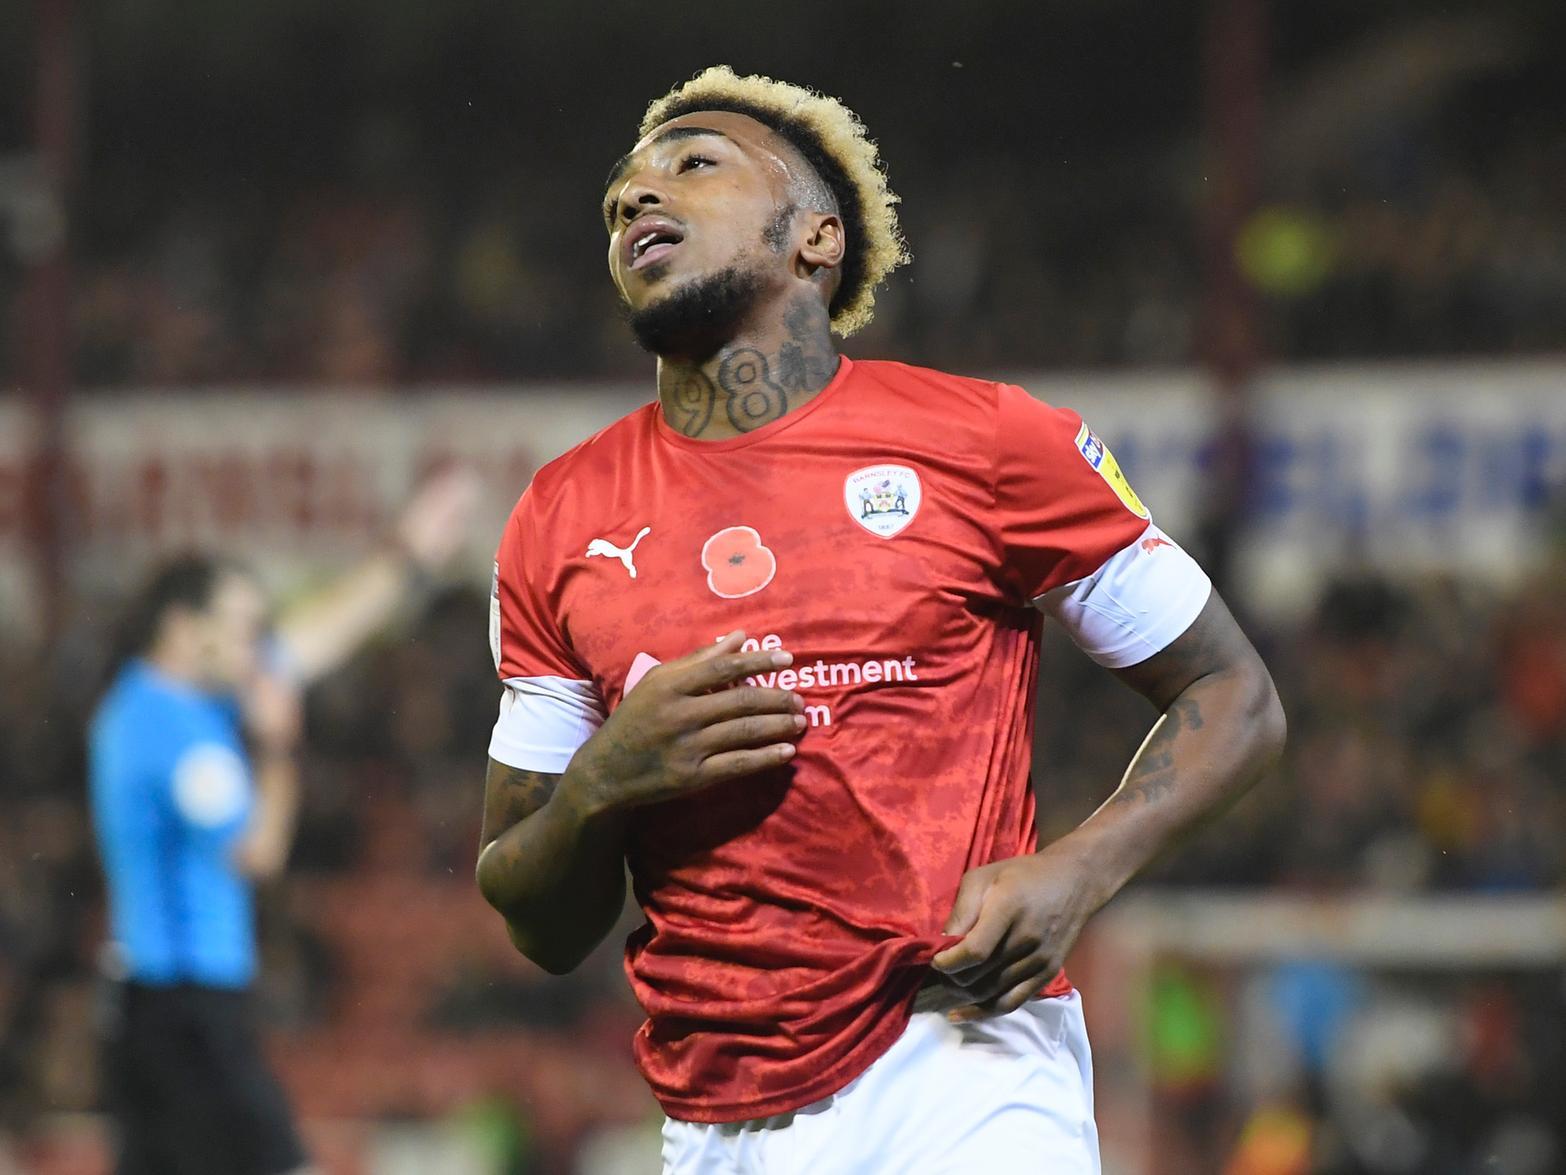 Doncaster Rovers are said to be plotting a move for Barnsley forward Mallik Wilks. He previously impressed for the League One outfit during a loan spell last season. (Doncaster Free Press)